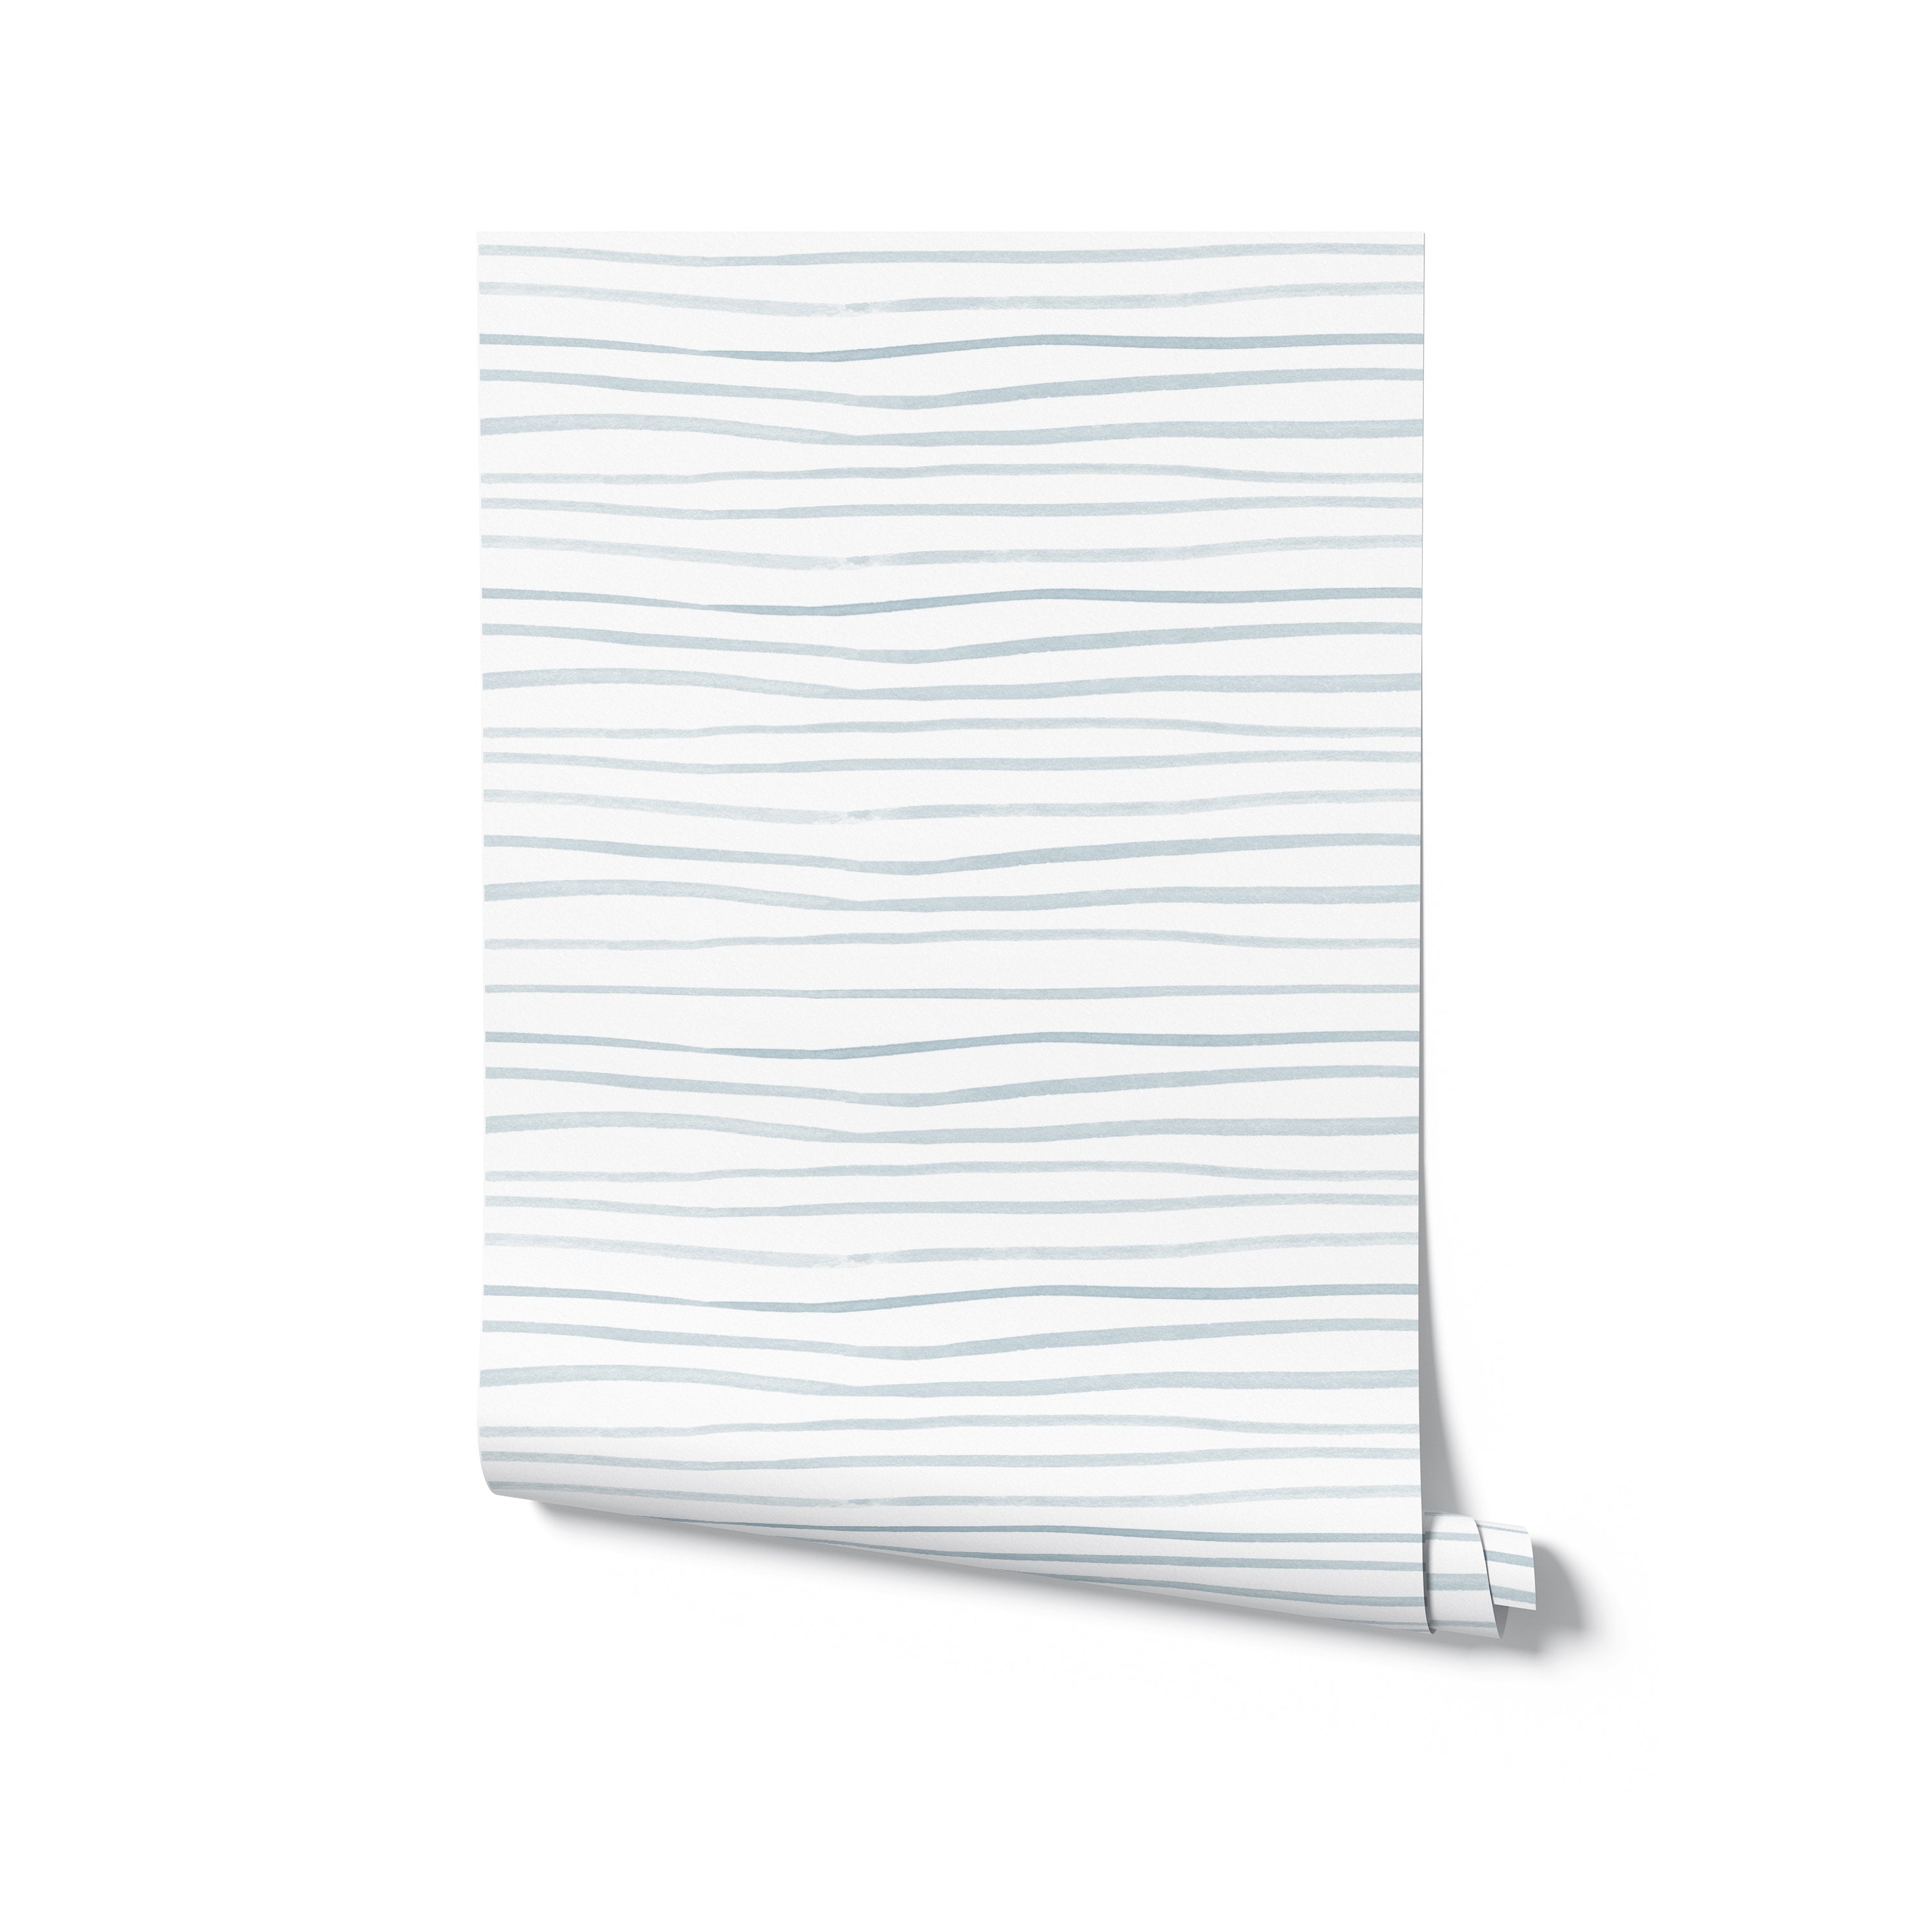 A roll of wallpaper featuring minimalistic blue brush stroke lines on a white background, perfect for adding a touch of calm and elegance to any room.